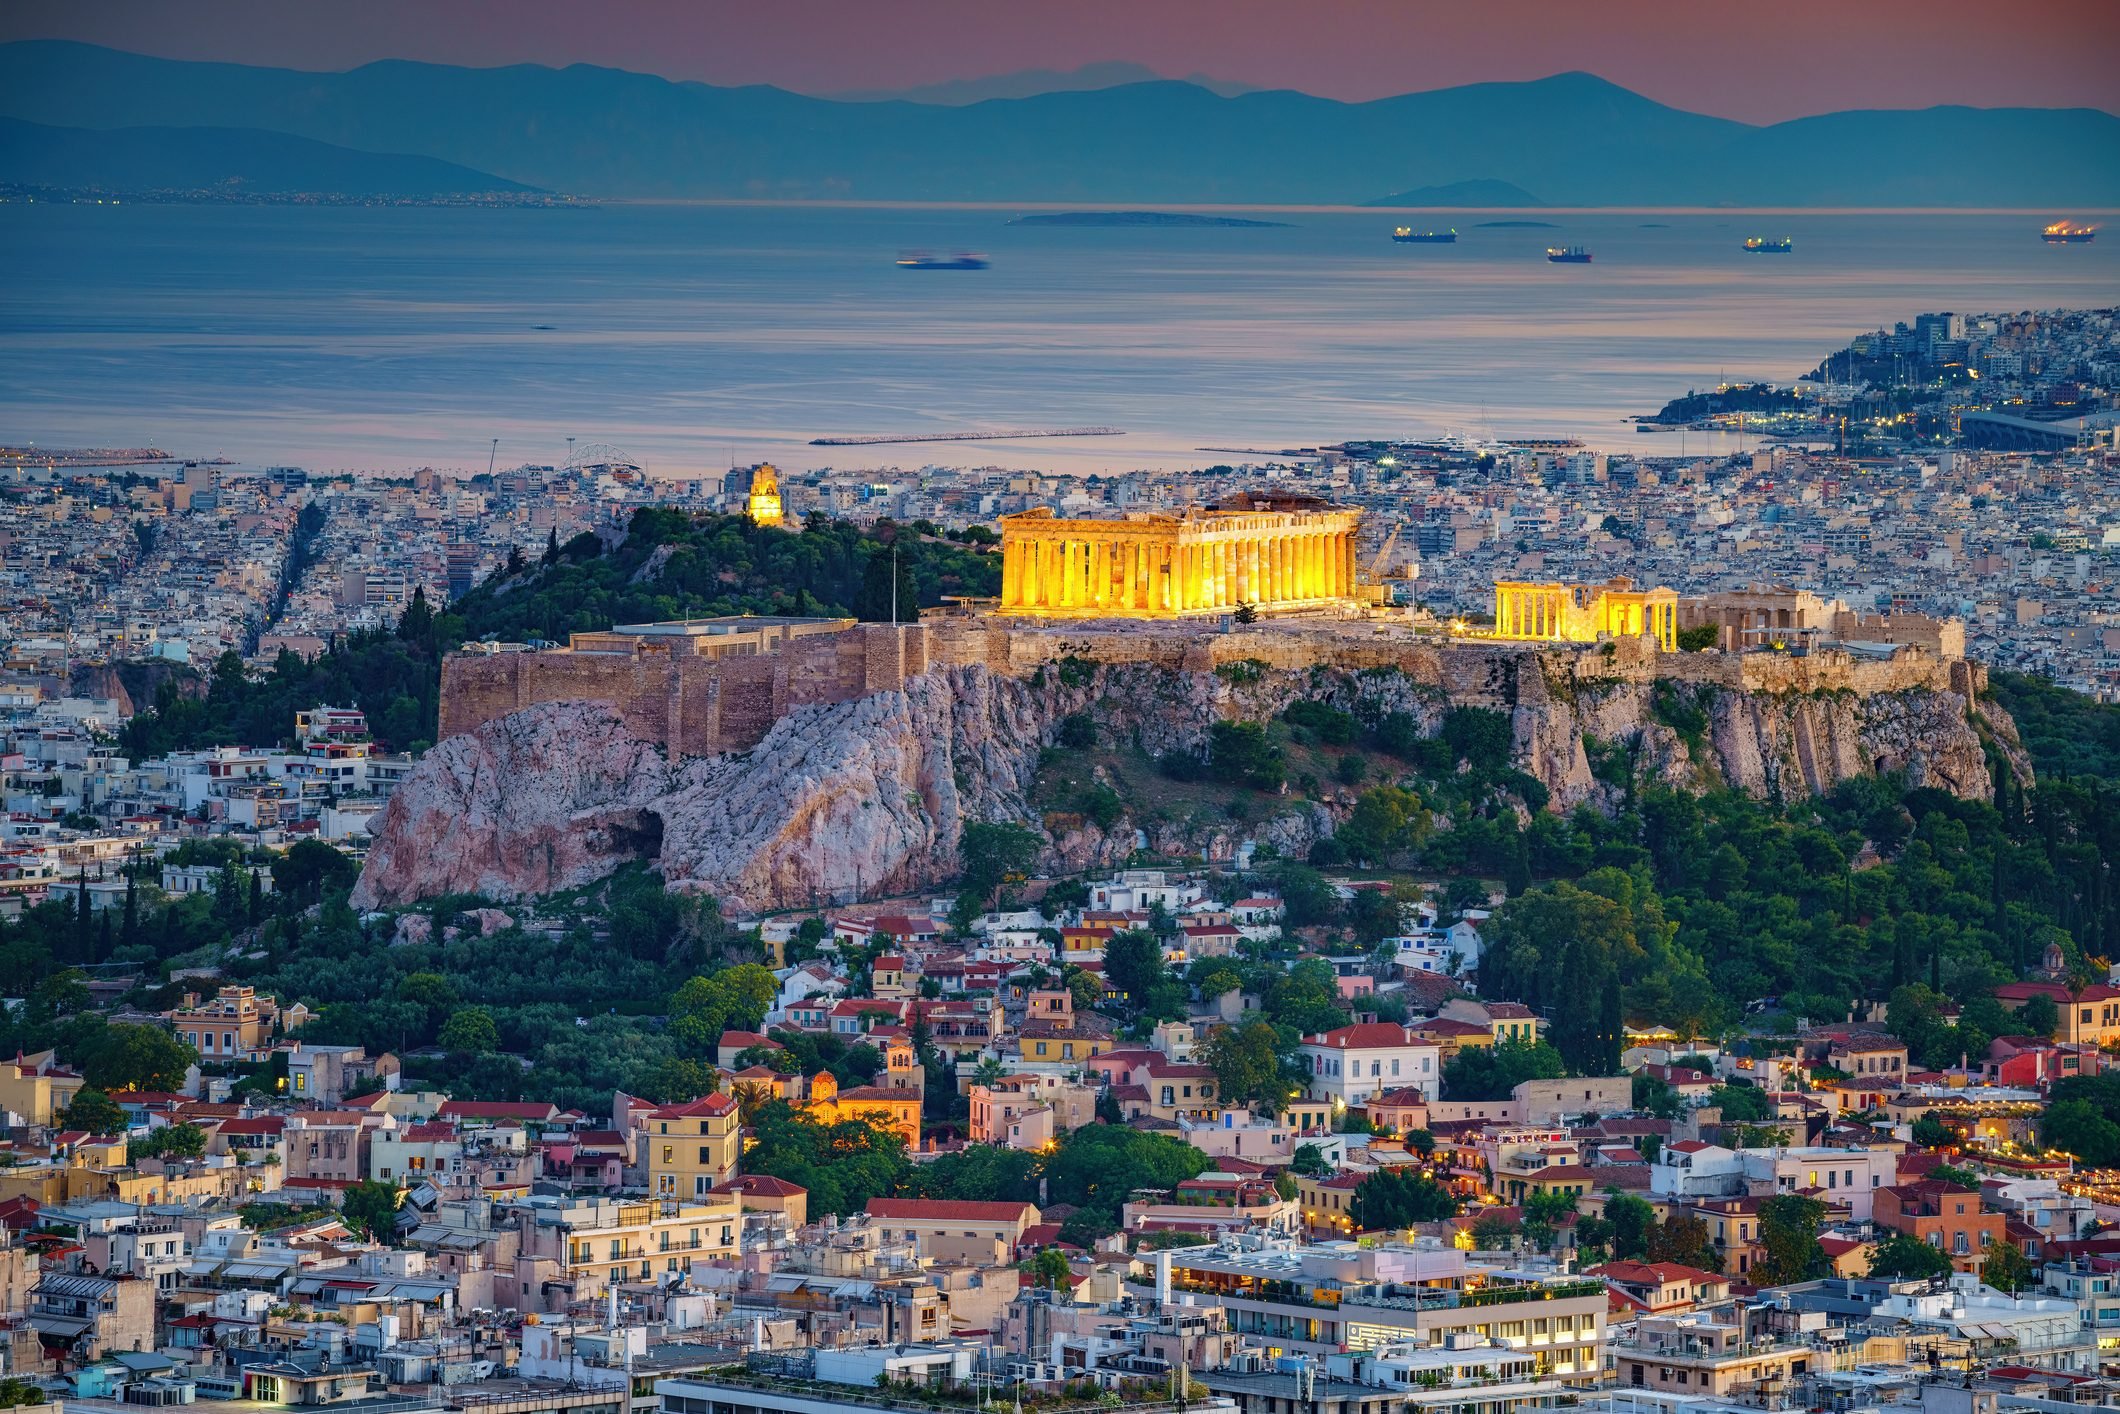 <p><strong>Best for:</strong> Guided tours</p> <p>An absolute must-visit <a href="https://www.rd.com/list/things-to-do-in-greece/" rel="noopener noreferrer">highlight of Greece</a> is the city of Athens, which offers a unique mixture of modern buildings and ancient monuments. You'll find bustling cosmopolitan streets lined with shops and international hotels, but turn any corner and the views of the storied Acropolis appear before you. More than 22% of the population is over 65 years old, so it's no wonder the city has a large number of guided tours aimed at senior citizens—an astounding 181, according to InsureMyTrip.</p> <p class="listicle-page__cta-button-shop"><a class="shop-btn" href="https://www.tripadvisor.com/AttractionProductReview-g189400-d11448044-Acropolis_of_Athens_Tour_with_optional_ticket-Athens_Attica.html">Book a Tour</a></p>